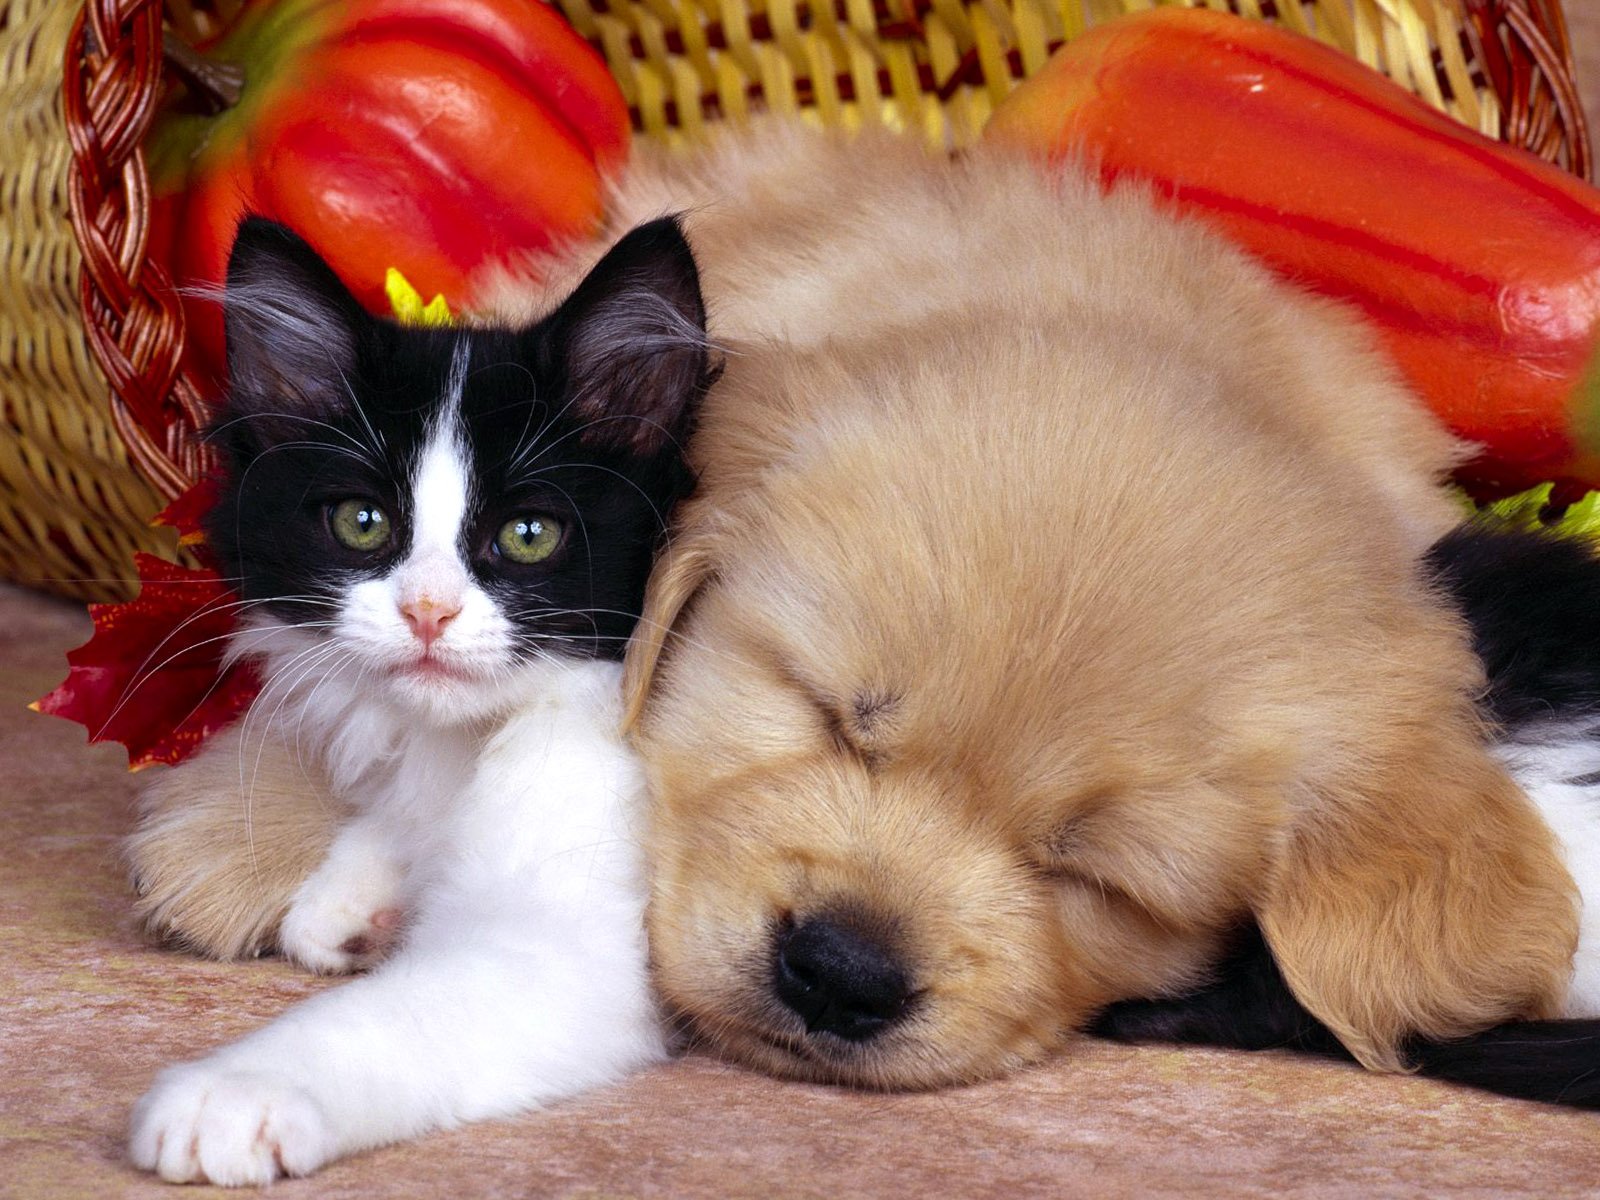 Sleeping Cat And Dog Free Download Wallpaper